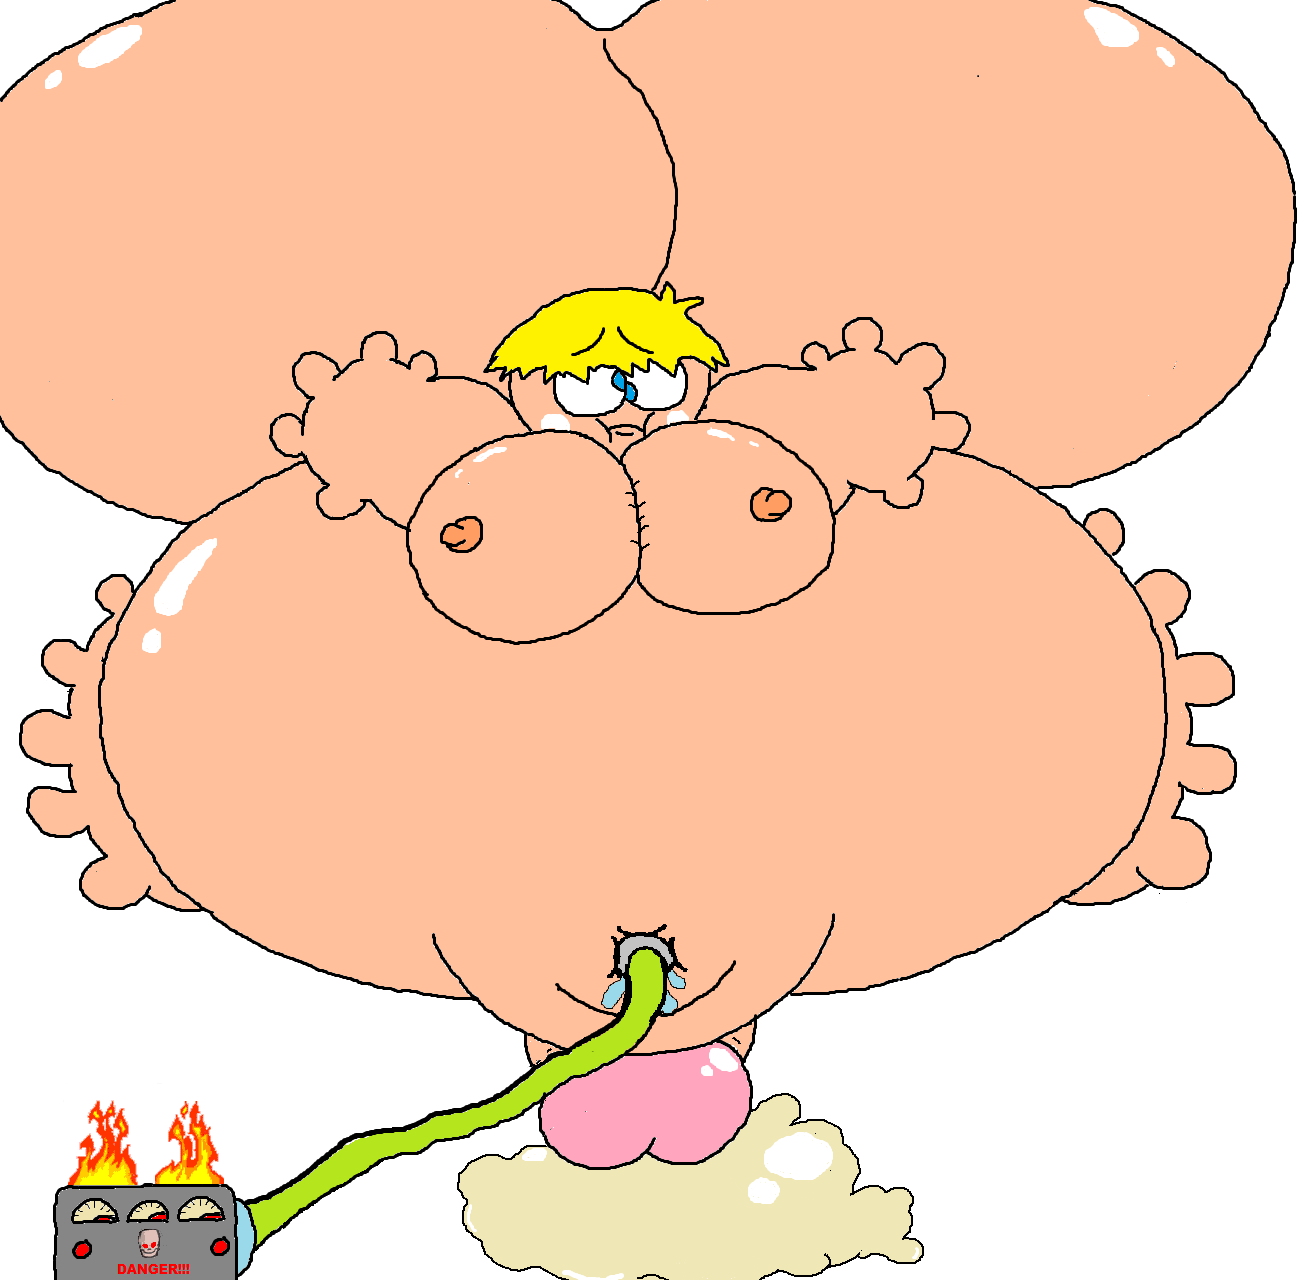 aroused ass big_feet blonde_hair cum cute deleteme dumb_drum erect erection feet hair hot inflation kenny_mccormick moobs nipples pain penis plump scared shiny south_park tease toes worried